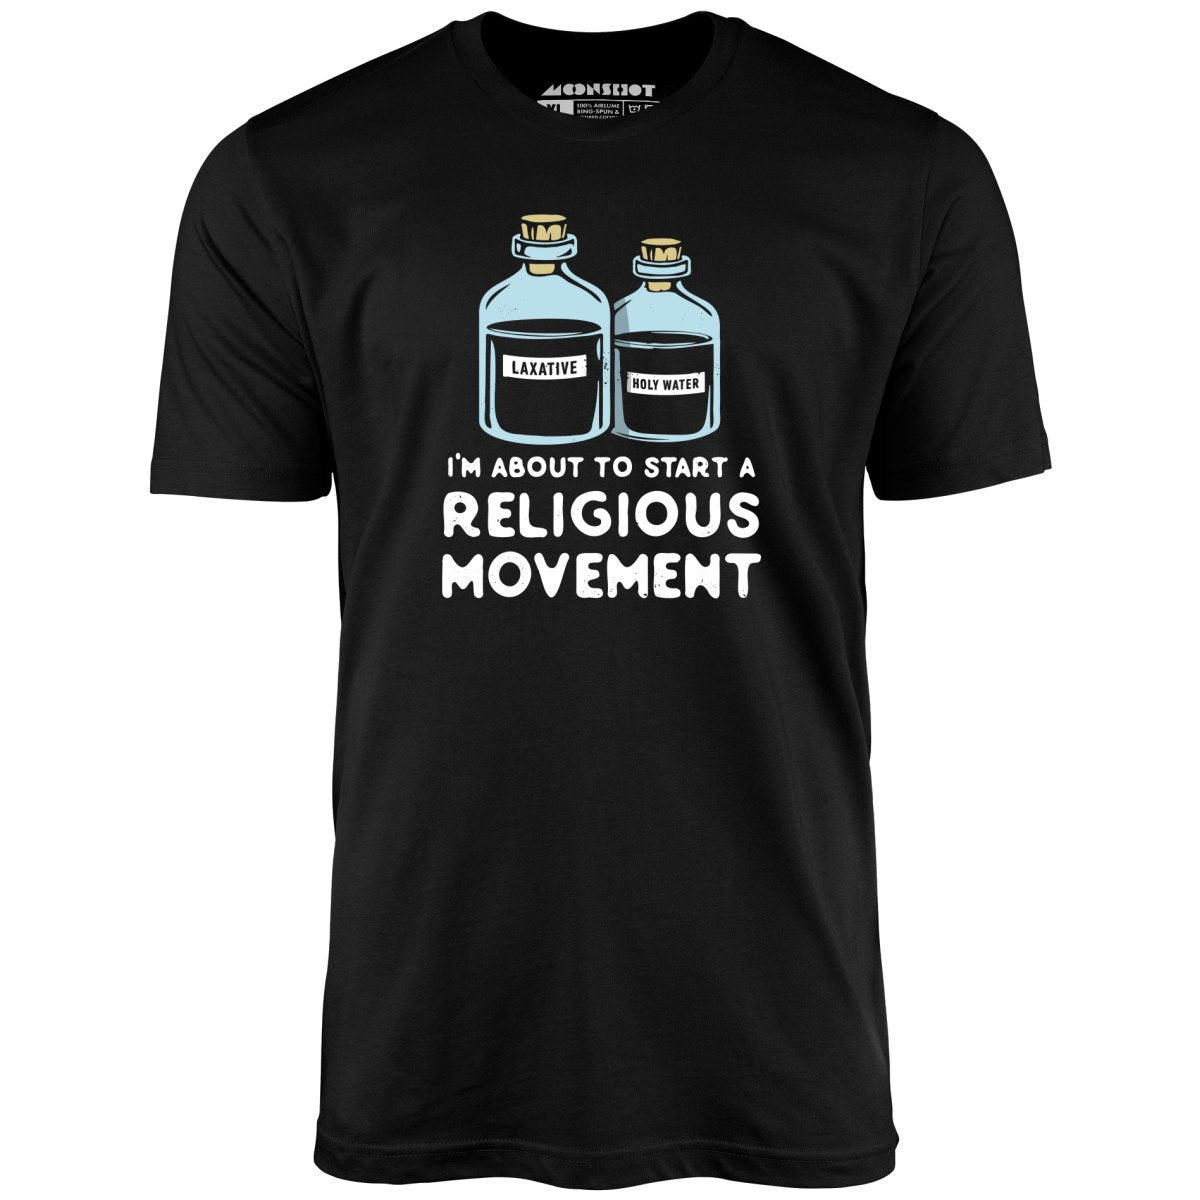 I'm About to Start a Religious Movement - Unisex T-Shirt